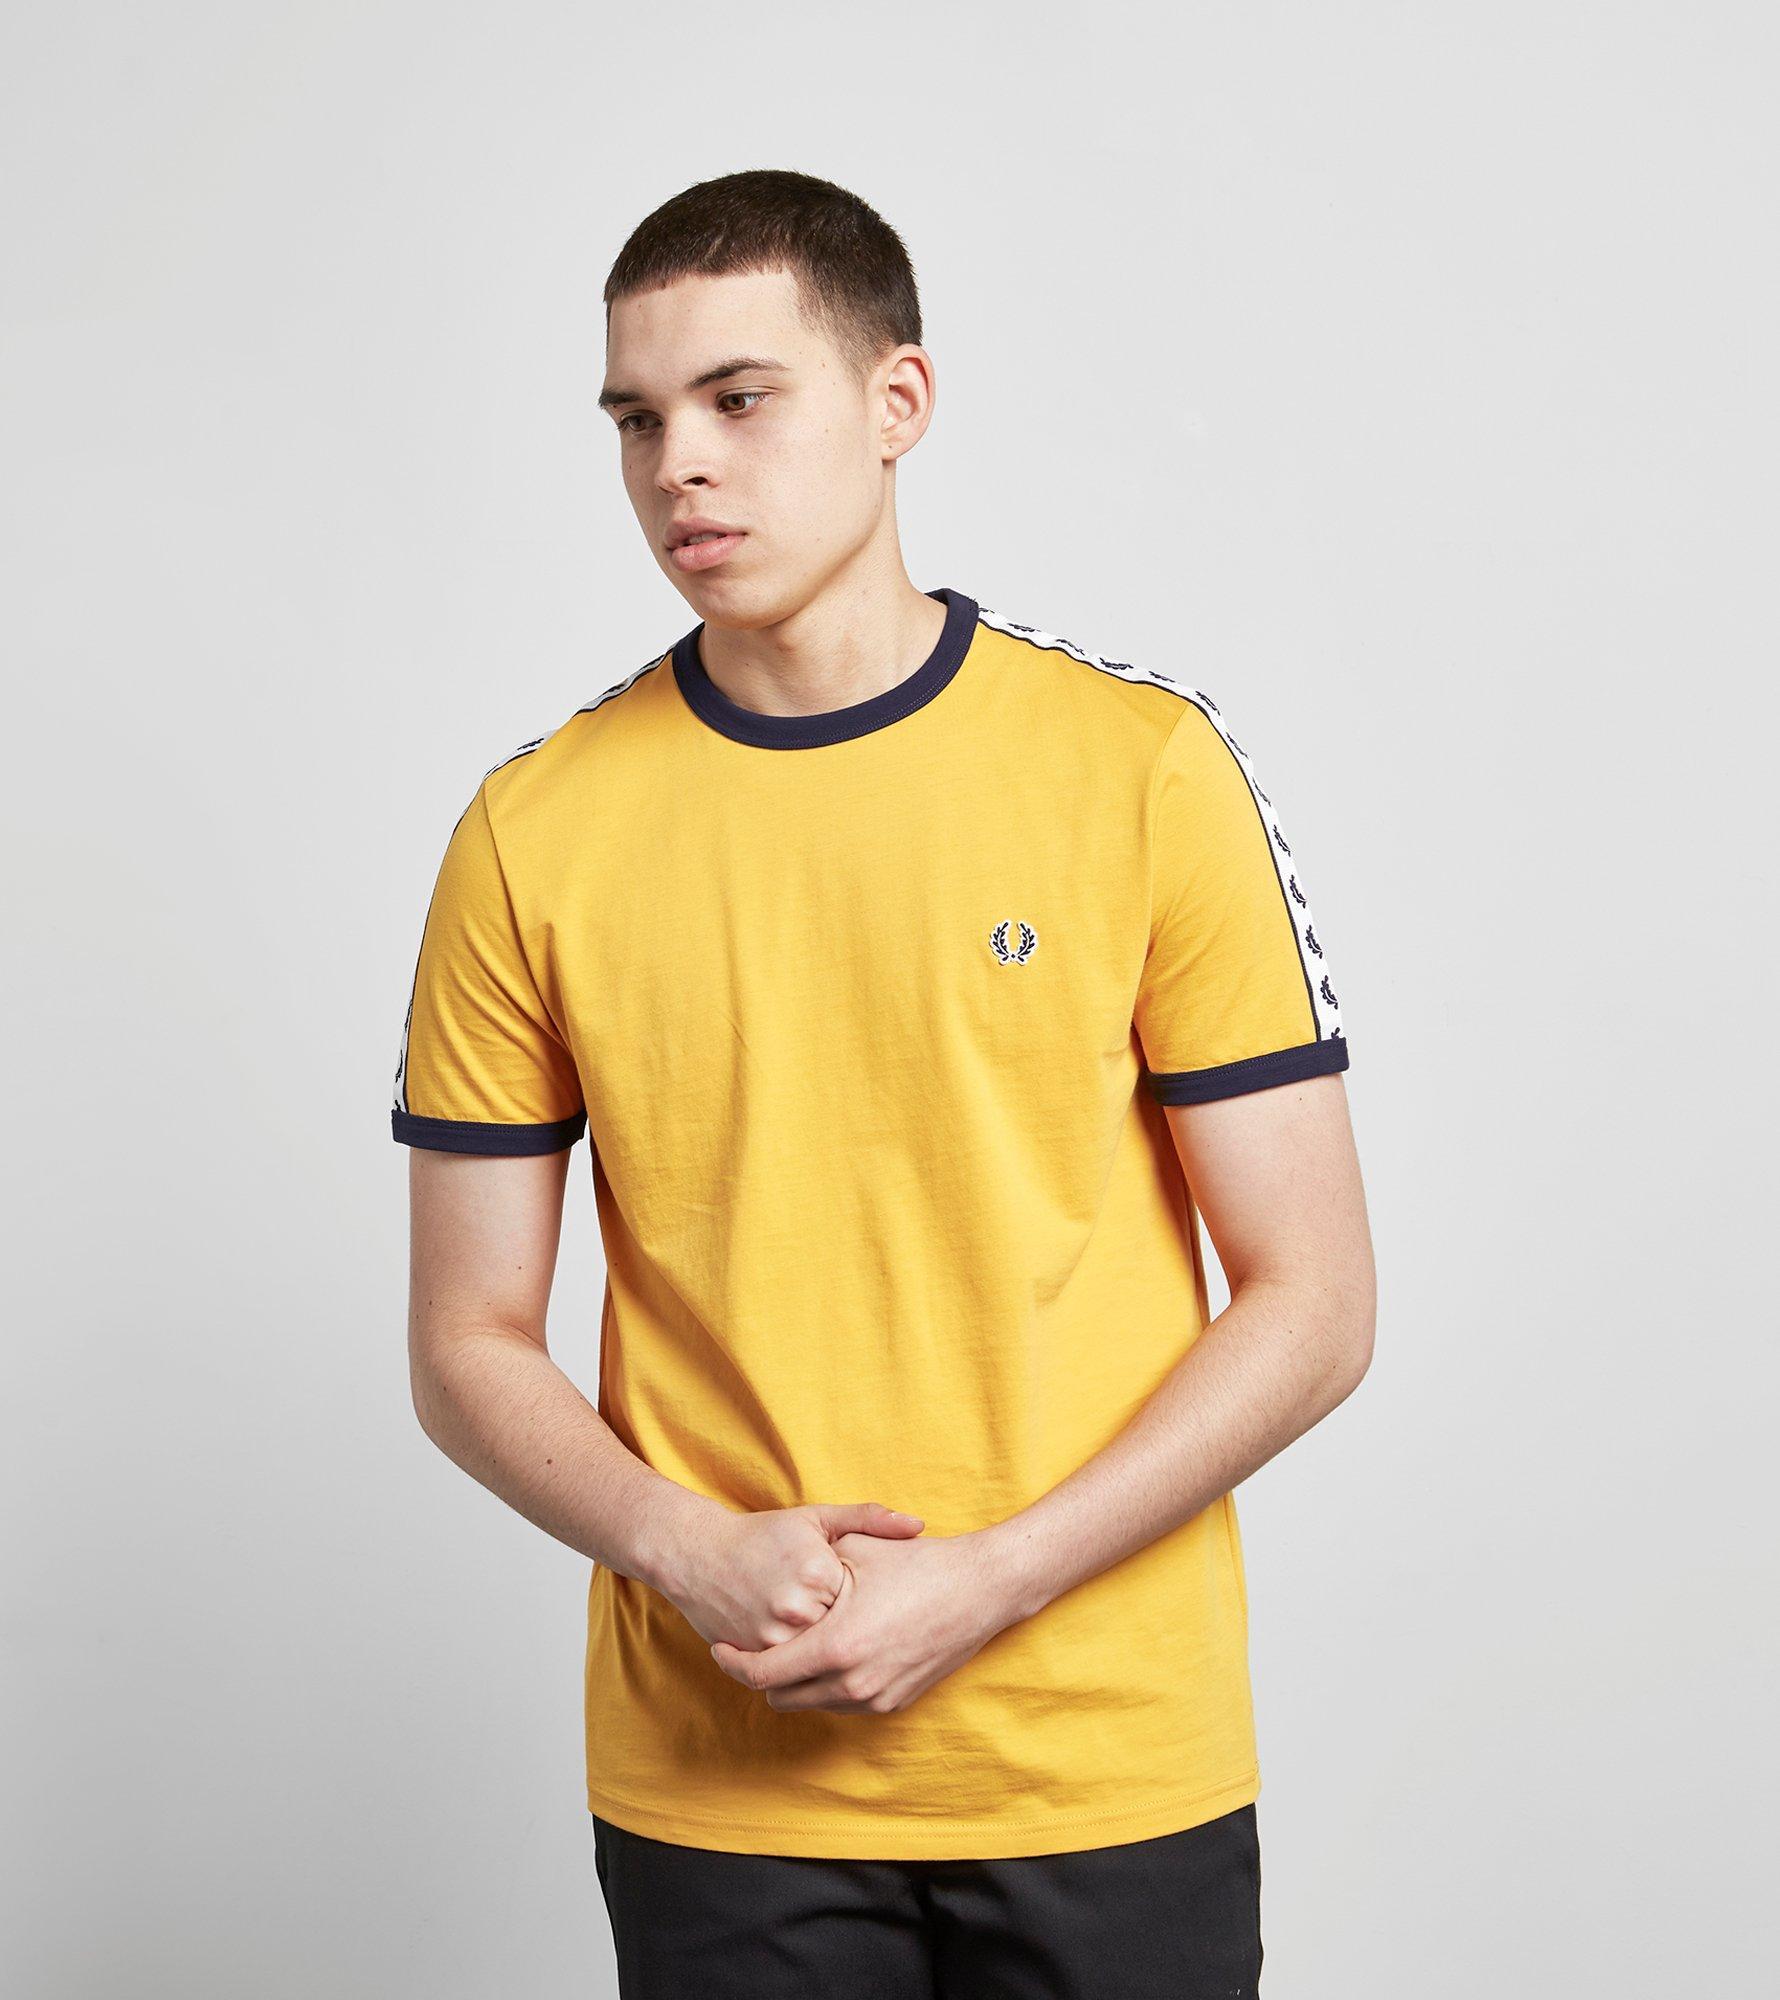 Lyst Fred  Perry  Taped Ringer T shirt in Yellow  for Men